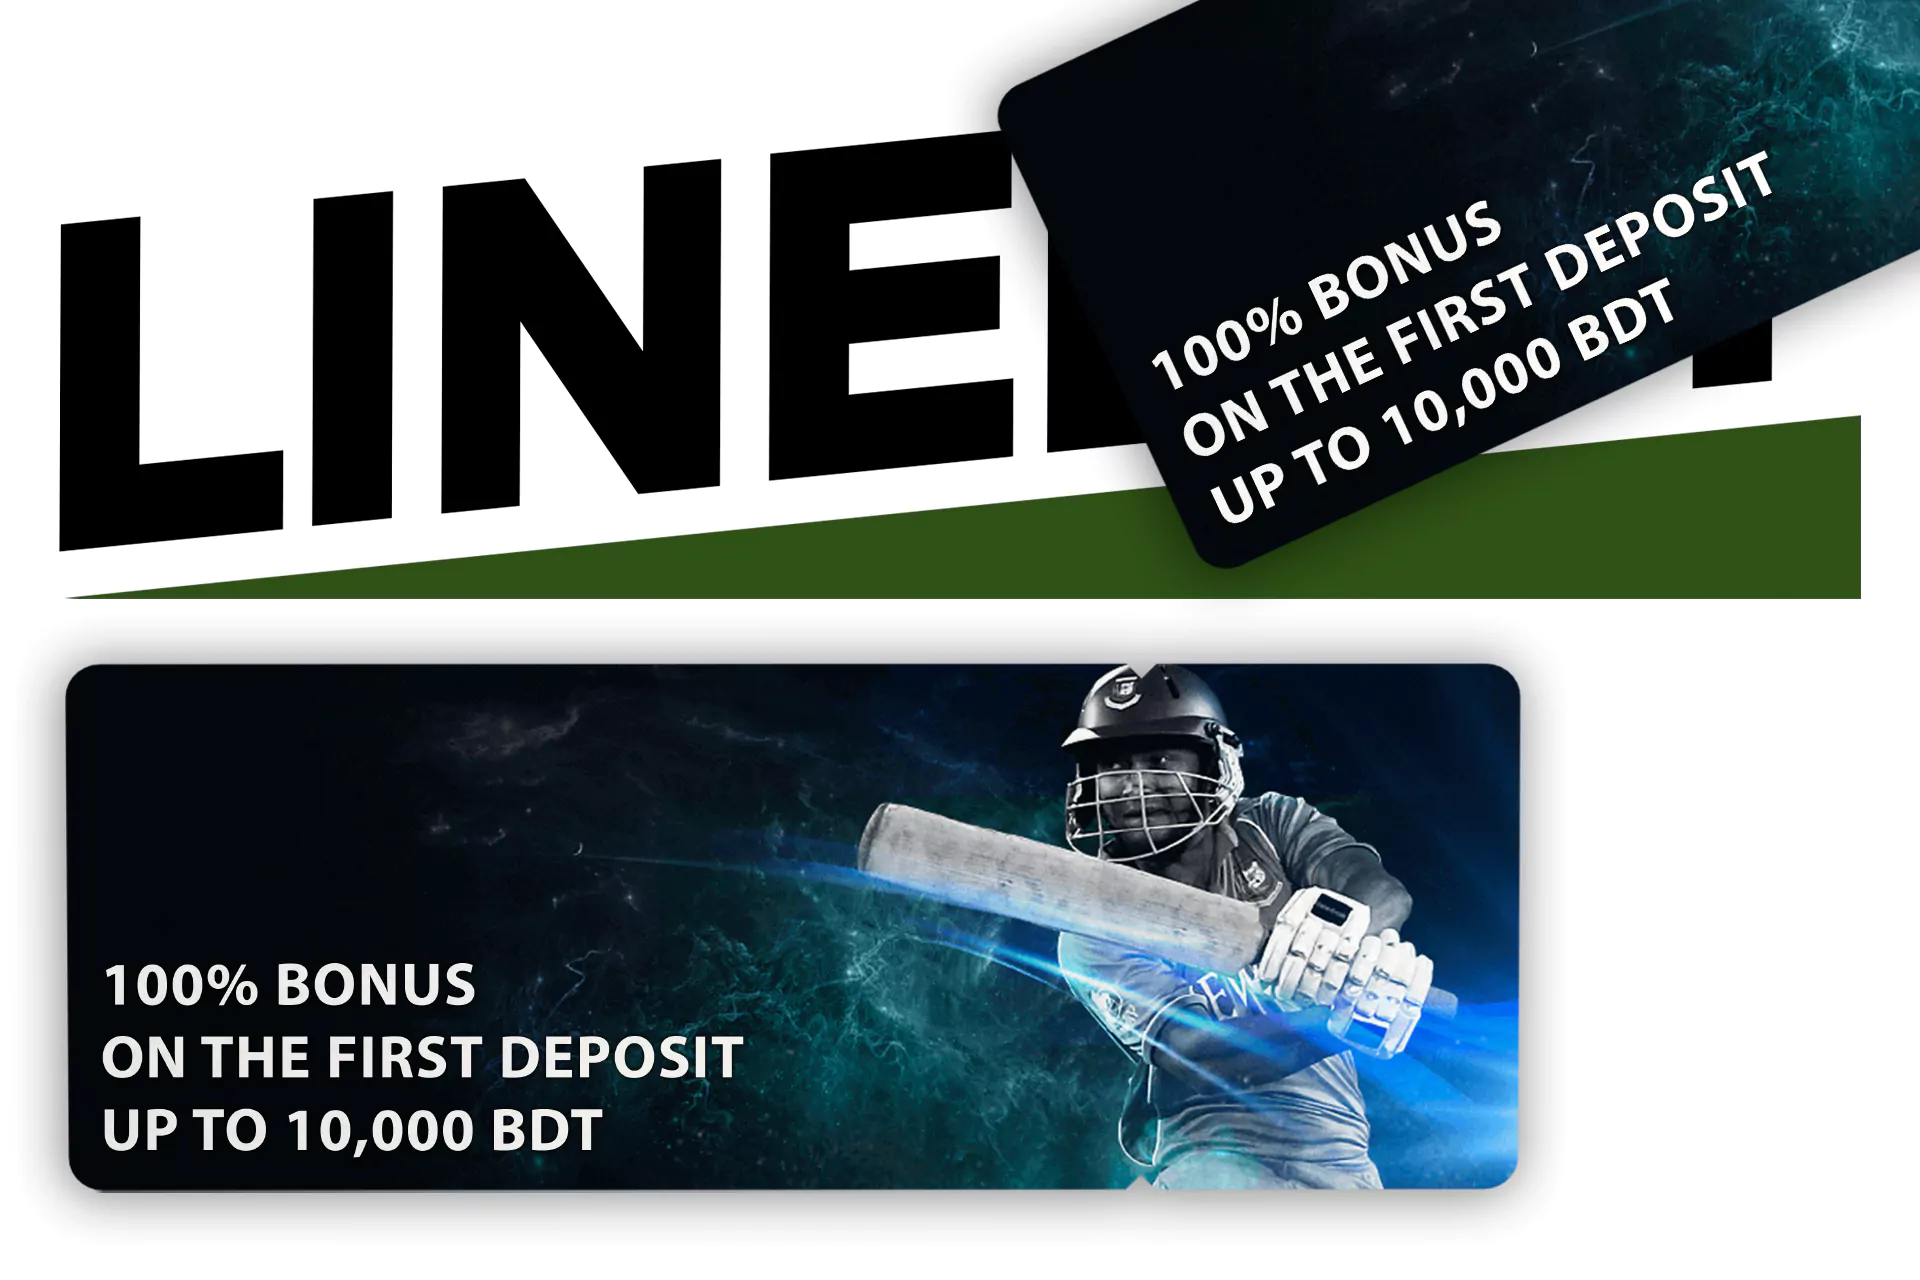 After you make your first deposit, you can get the welcome bonus.